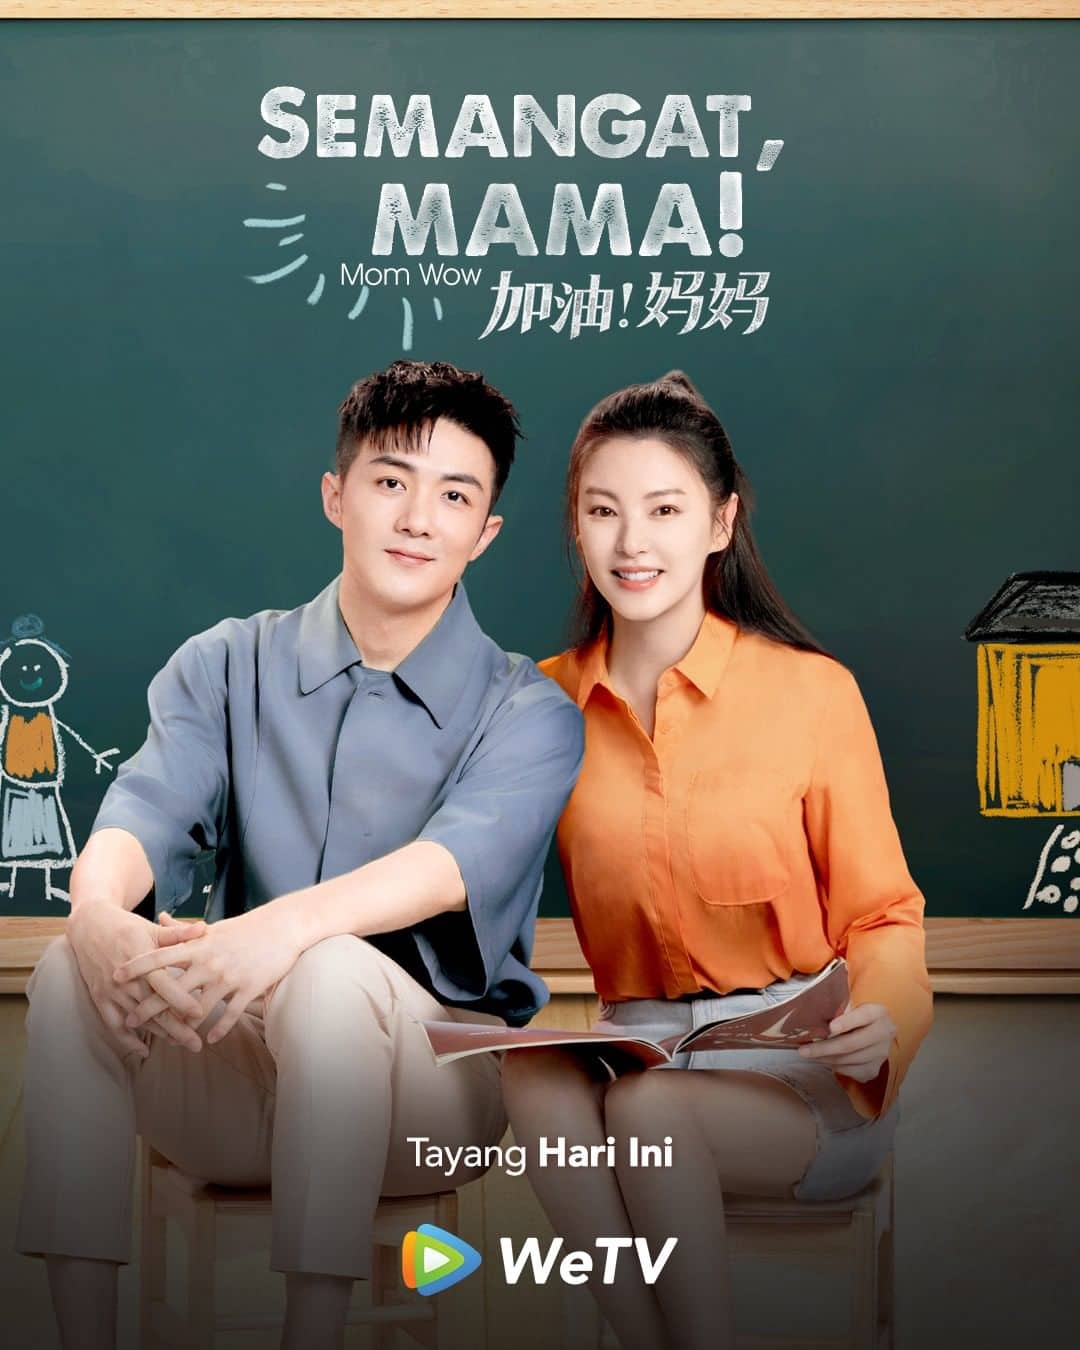 Mom Now - Sinopsis, Pemain, OST, Episode, Review